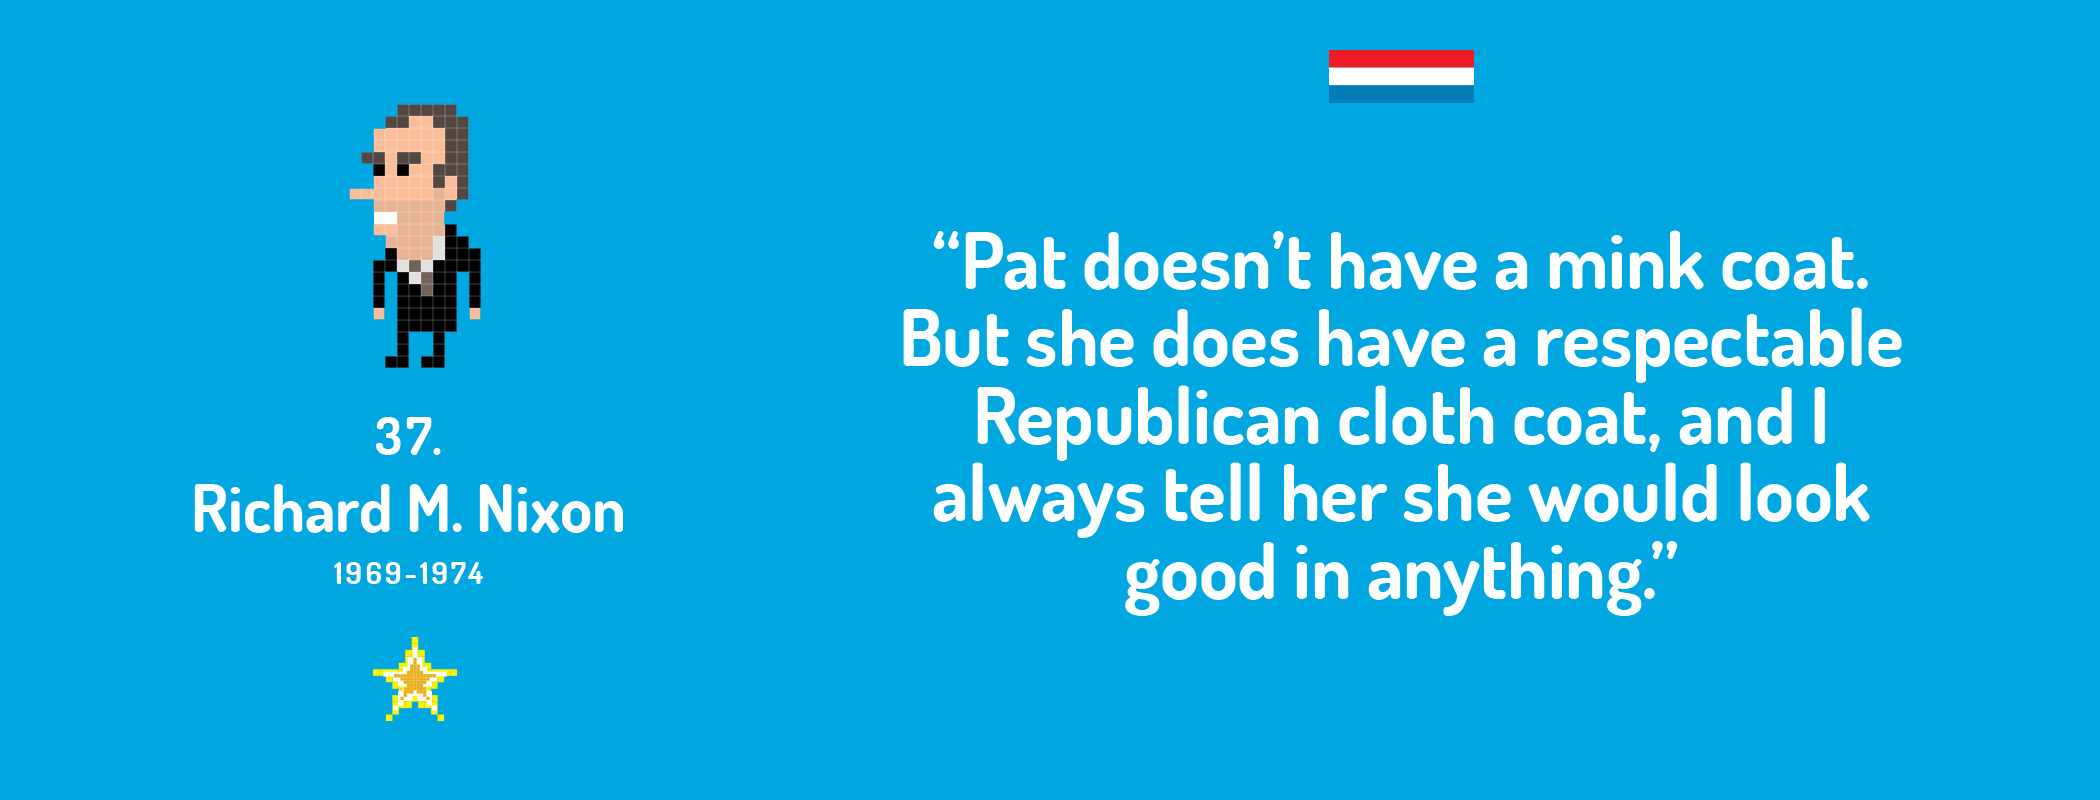 Pat doesn't have a mink coat. But she does have a respectable Republican cloth coat, and I always tell her she would look good in anything.